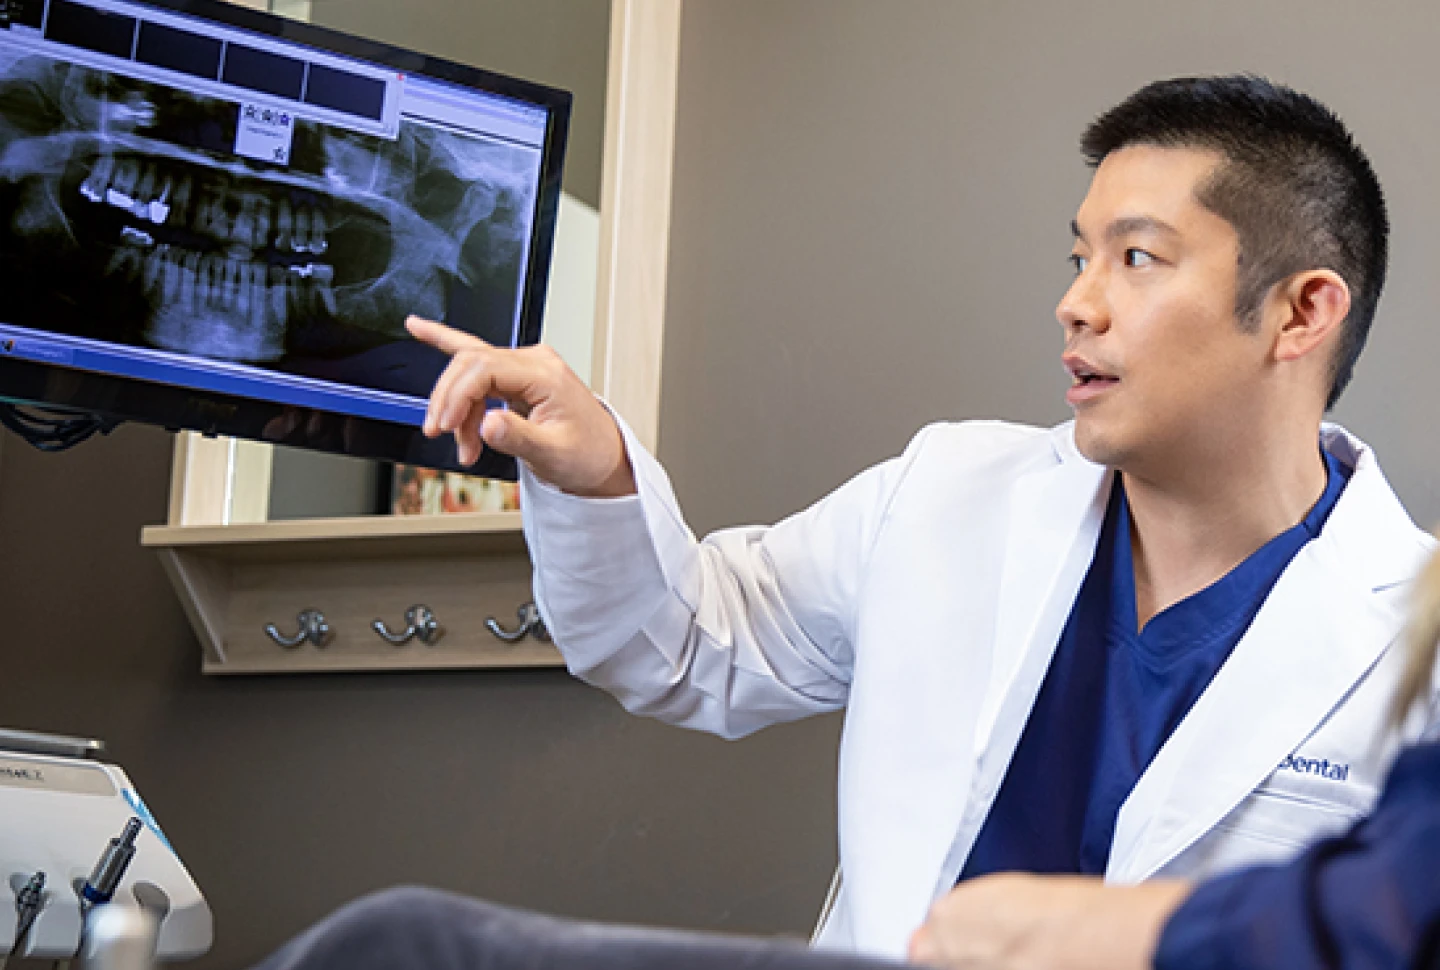 An Aspen Dental dentist reviewing dental X-rays with a patient, discussing oral health and treatment options on a computer screen.